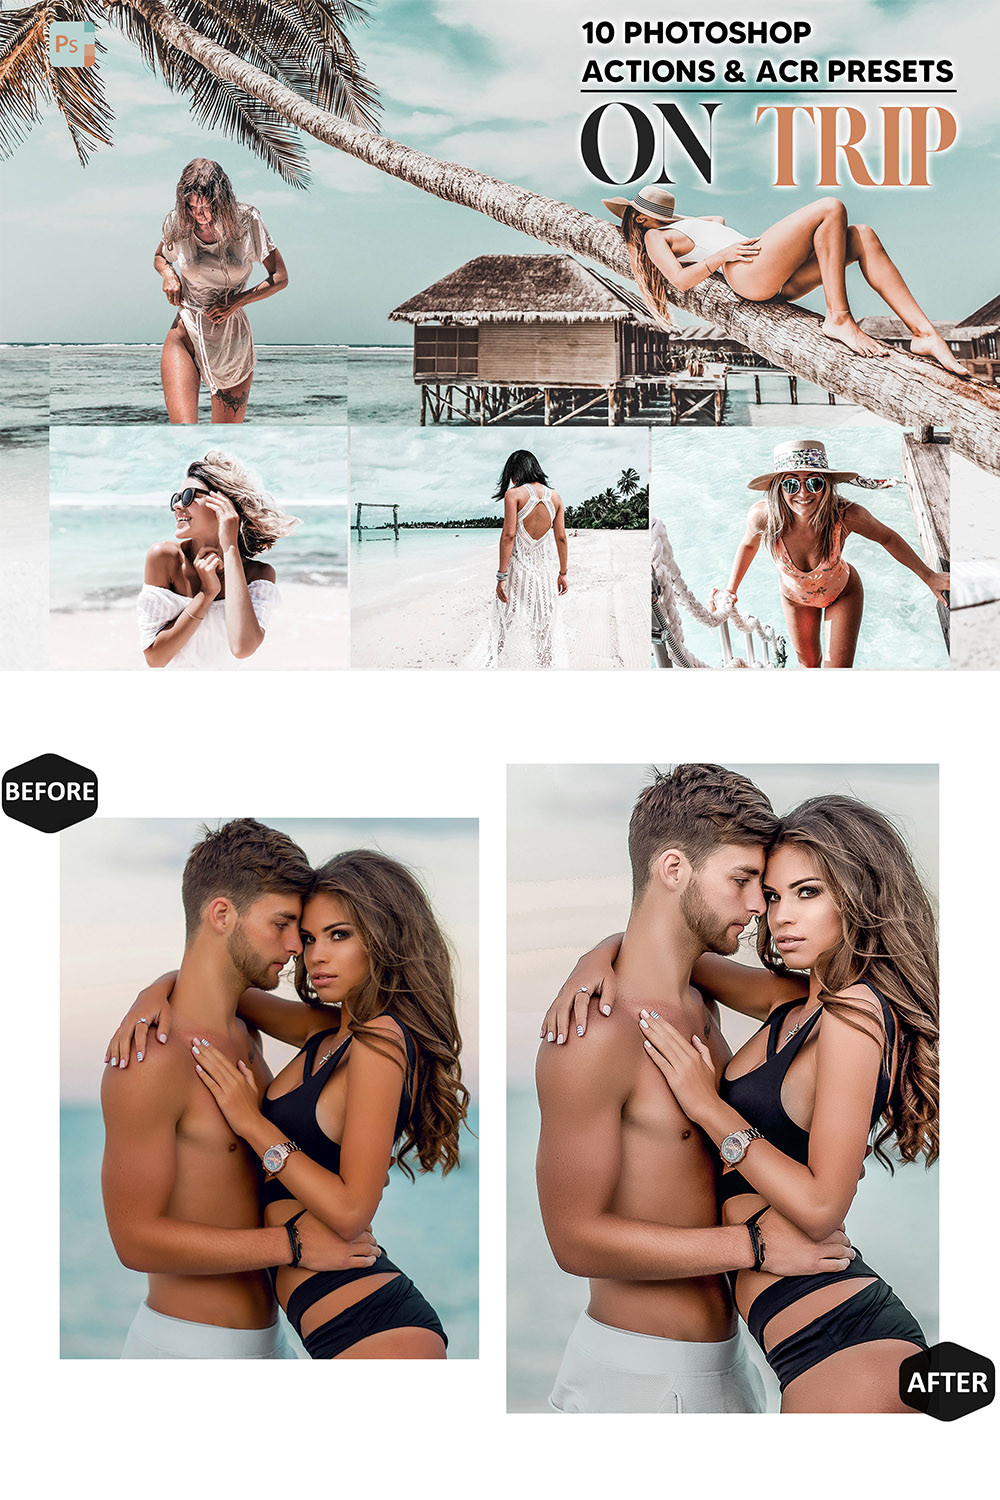 10 Photoshop Actions, On Trip Ps Action, Summer ACR Preset, Beach Ps Filter, Atn Portrait And Lifestyle Theme For Instagram, Blogge pinterest preview image.